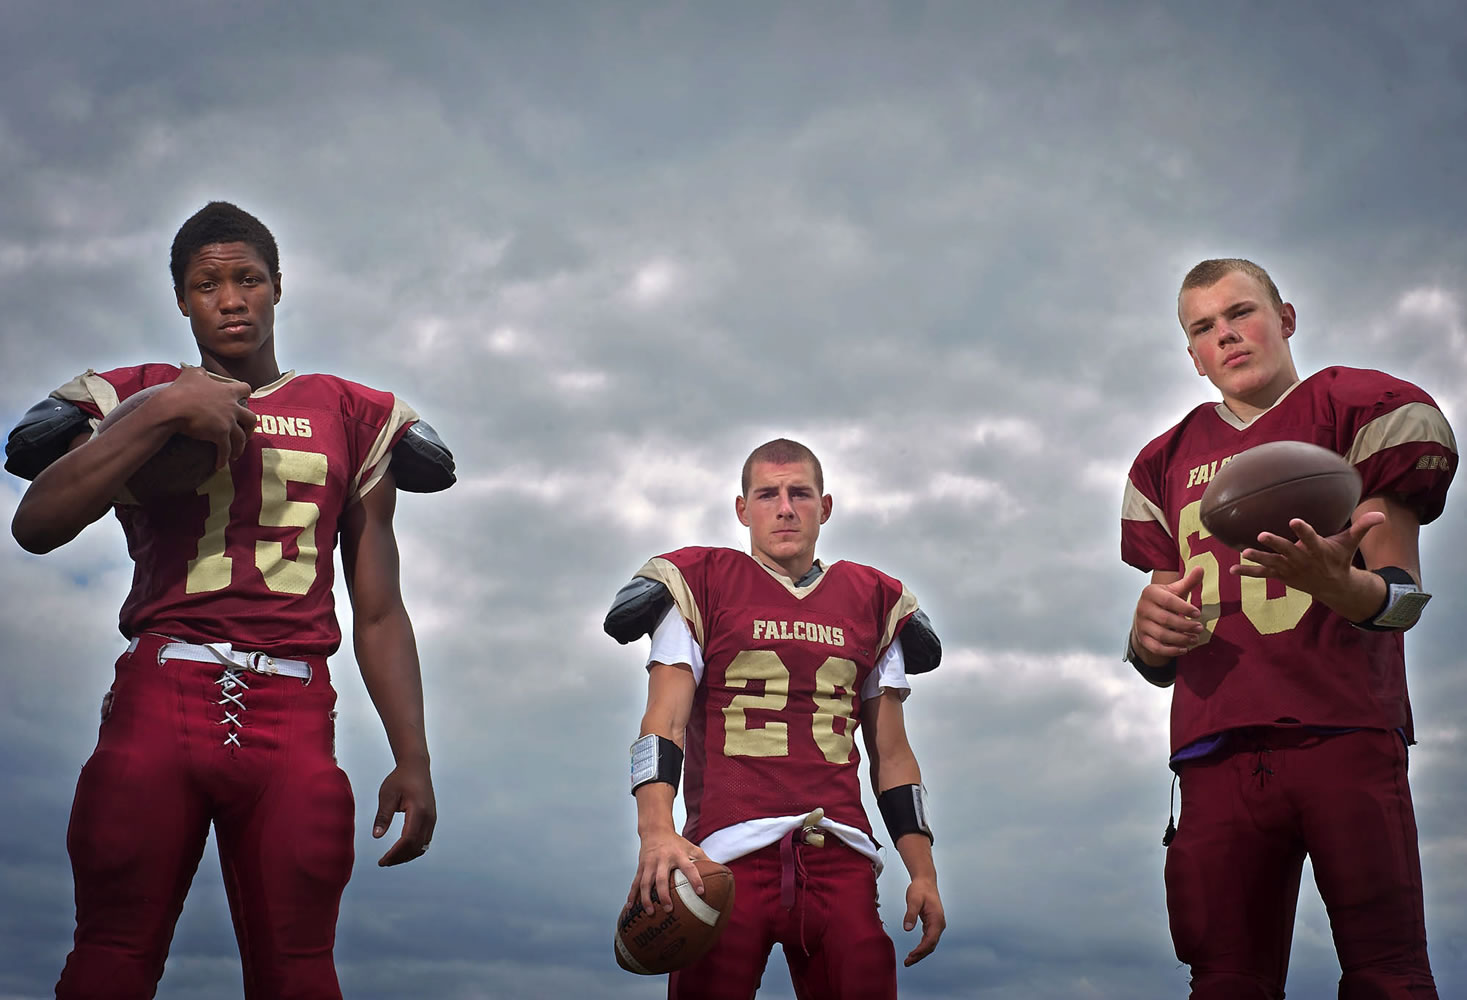 Prairie's trio of wide receivers (from left) Colton Prestwich, Nick Gawley and Jason Bracken are looking to continue Prairie's winning ways.